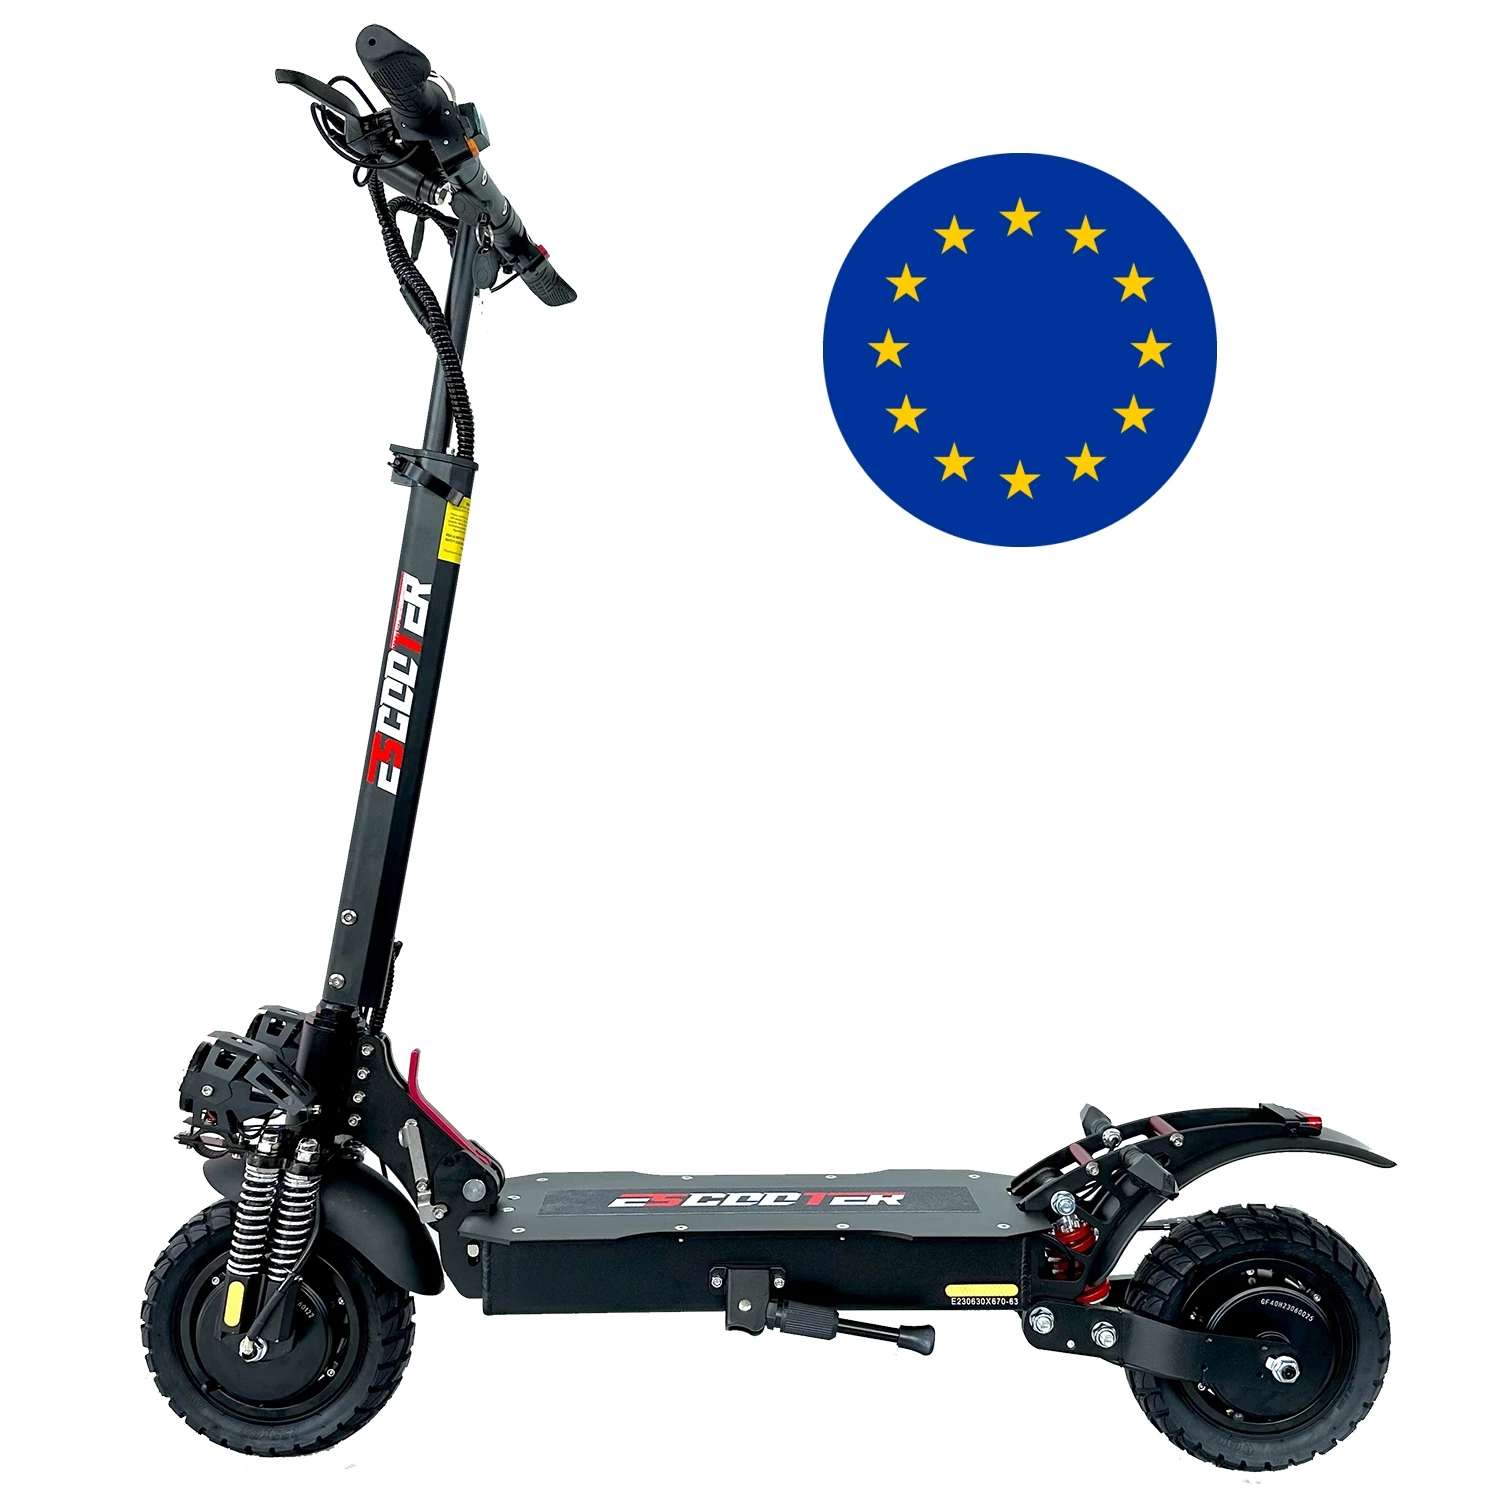 

new eu stock electric scooter X6 1200w*2 2400w 48v 60km range electric dual motor scooters 150kg max load